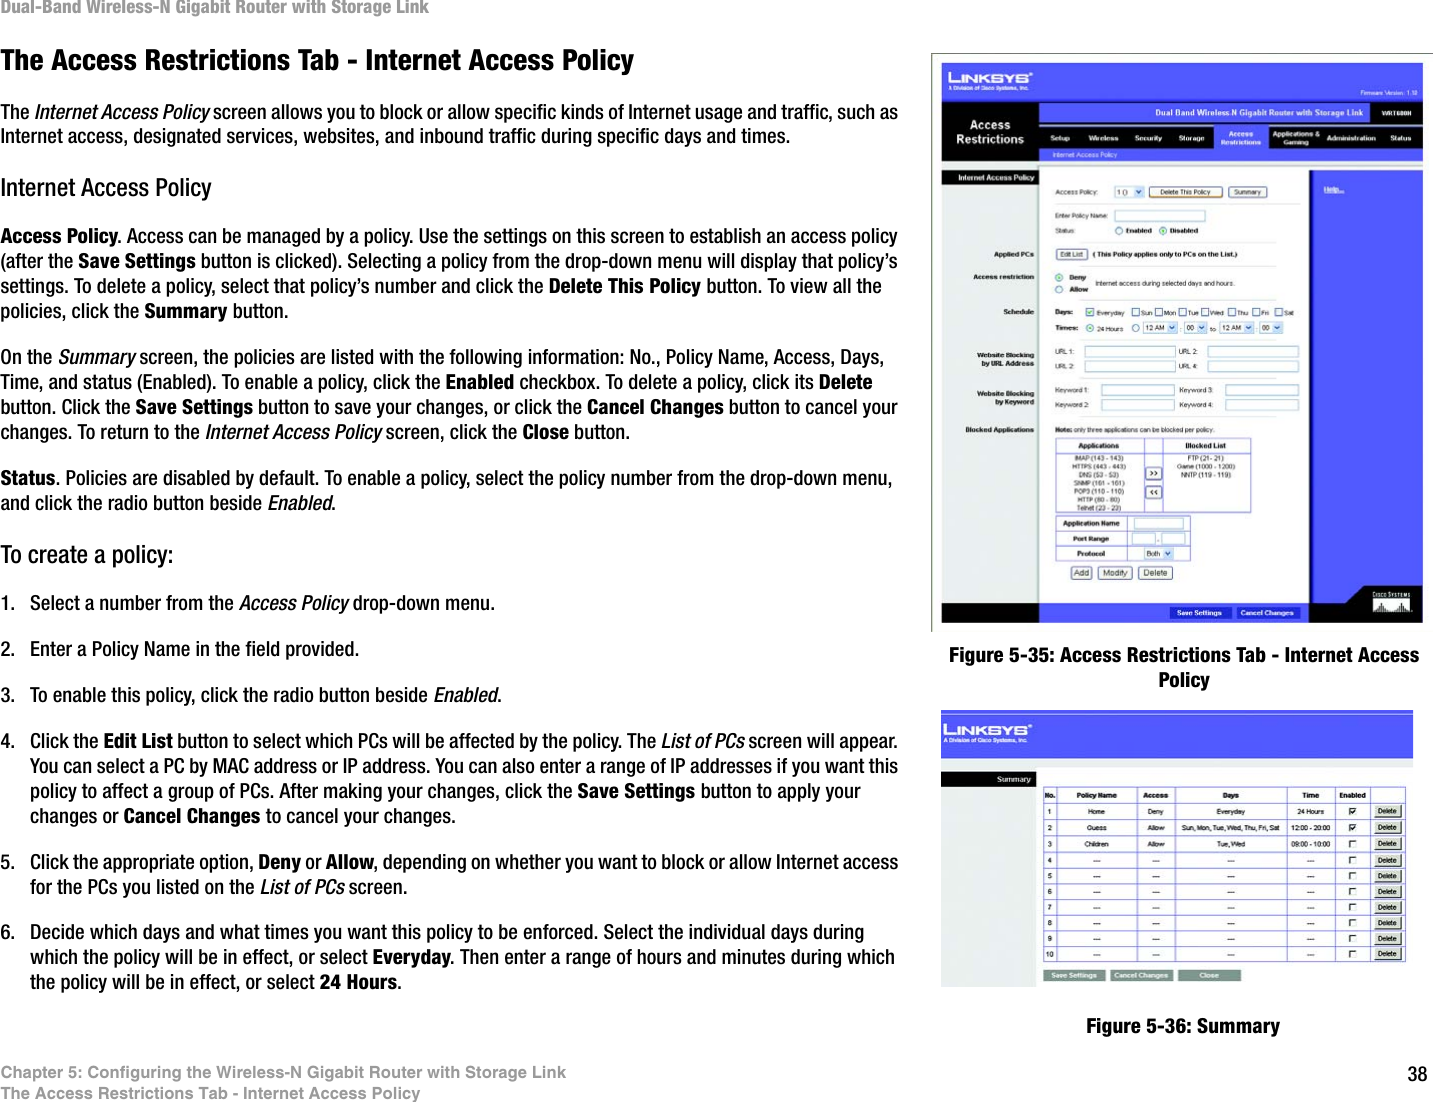 38Chapter 5: Configuring the Wireless-N Gigabit Router with Storage LinkThe Access Restrictions Tab - Internet Access PolicyDual-Band Wireless-N Gigabit Router with Storage LinkThe Access Restrictions Tab - Internet Access PolicyThe Internet Access Policy screen allows you to block or allow specific kinds of Internet usage and traffic, such as Internet access, designated services, websites, and inbound traffic during specific days and times.Internet Access PolicyAccess Policy. Access can be managed by a policy. Use the settings on this screen to establish an access policy (after the Save Settings button is clicked). Selecting a policy from the drop-down menu will display that policy’s settings. To delete a policy, select that policy’s number and click the Delete This Policy button. To view all the policies, click the Summary button. On the Summary screen, the policies are listed with the following information: No., Policy Name, Access, Days, Time, and status (Enabled). To enable a policy, click the Enabled checkbox. To delete a policy, click its Delete button. Click the Save Settings button to save your changes, or click the Cancel Changes button to cancel your changes. To return to the Internet Access Policy screen, click the Close button. Status. Policies are disabled by default. To enable a policy, select the policy number from the drop-down menu, and click the radio button beside Enabled.To create a policy:1. Select a number from the Access Policy drop-down menu.2. Enter a Policy Name in the field provided.3. To enable this policy, click the radio button beside Enabled.4. Click the Edit List button to select which PCs will be affected by the policy. The List of PCs screen will appear. You can select a PC by MAC address or IP address. You can also enter a range of IP addresses if you want this policy to affect a group of PCs. After making your changes, click the Save Settings button to apply your changes or Cancel Changes to cancel your changes.5. Click the appropriate option, Deny or Allow, depending on whether you want to block or allow Internet access for the PCs you listed on the List of PCs screen.6. Decide which days and what times you want this policy to be enforced. Select the individual days during which the policy will be in effect, or select Everyday. Then enter a range of hours and minutes during which the policy will be in effect, or select 24 Hours.Figure 5-35: Access Restrictions Tab - Internet Access PolicyFigure 5-36: Summary